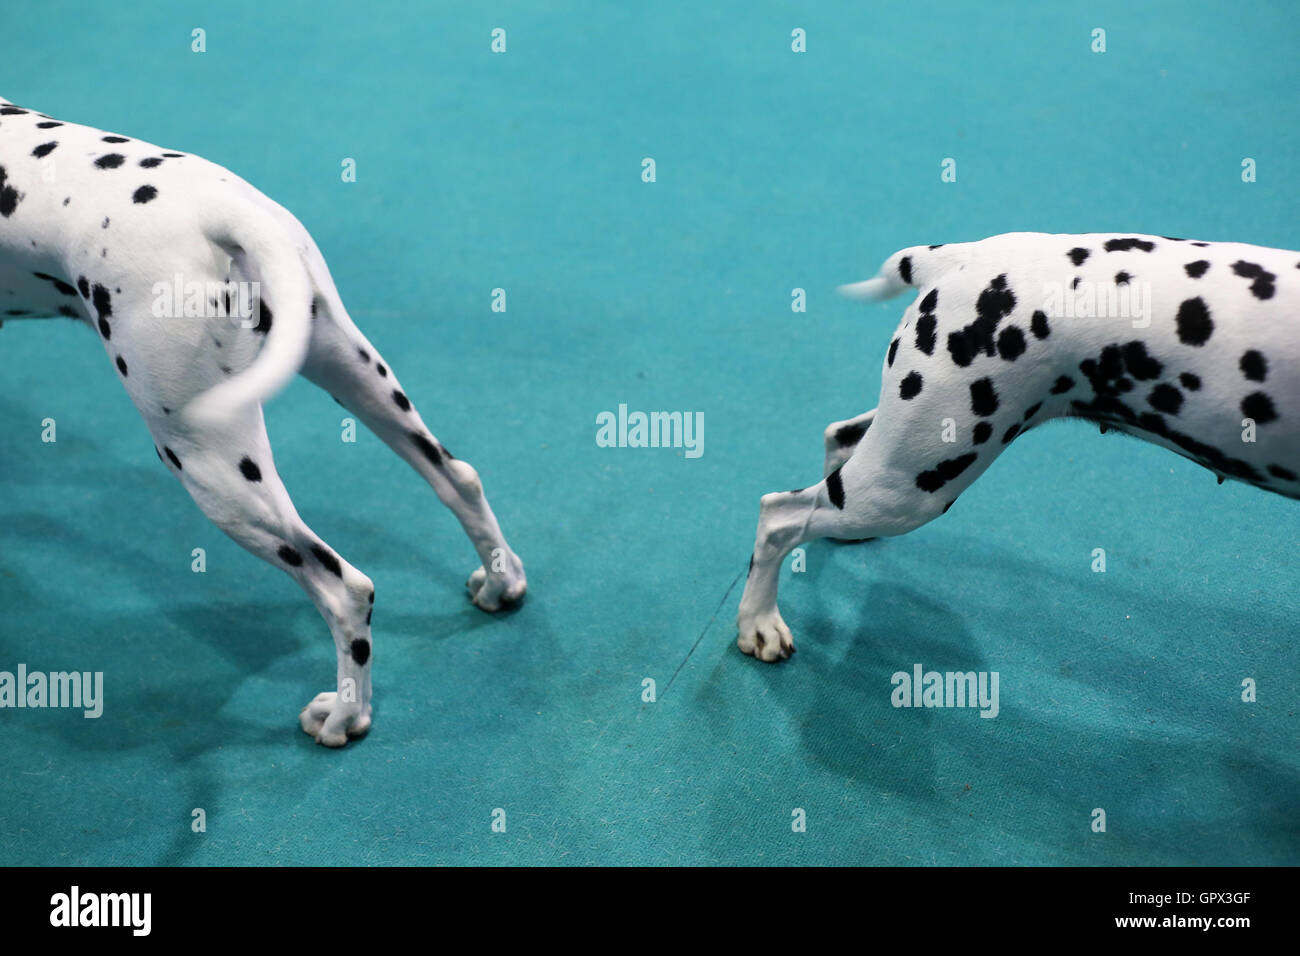 Two halves of Dalmatians at Crufts 2016 held at the NEC in Birmingham, West Midlands, UK. Stock Photo